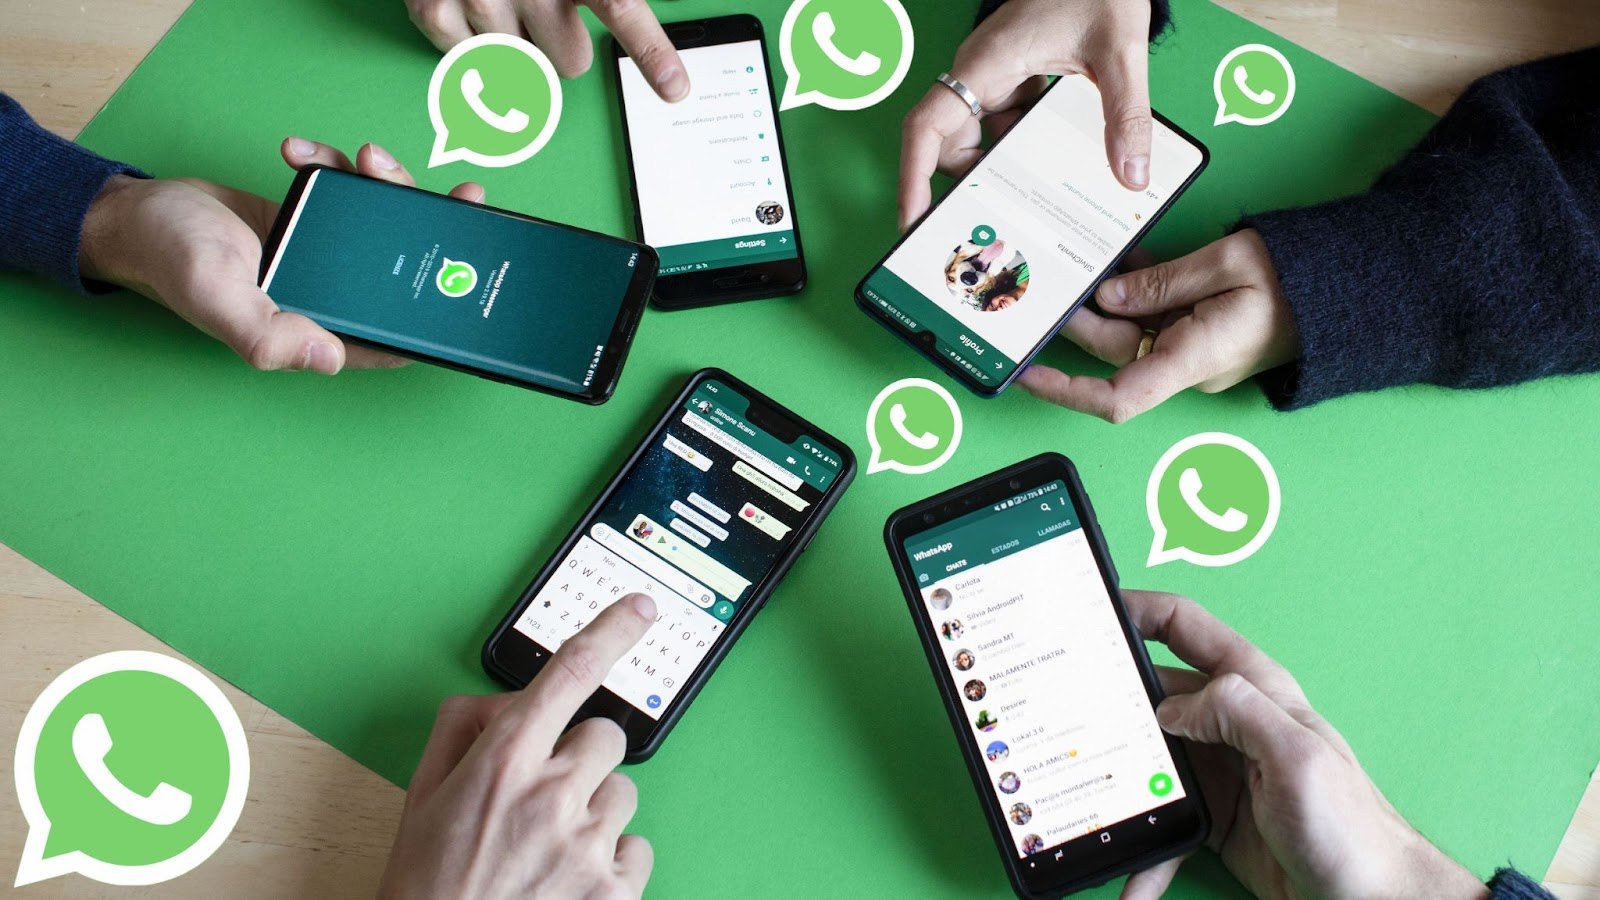 How to Send Messages on WhatsApp Without Adding the Person to Contacts